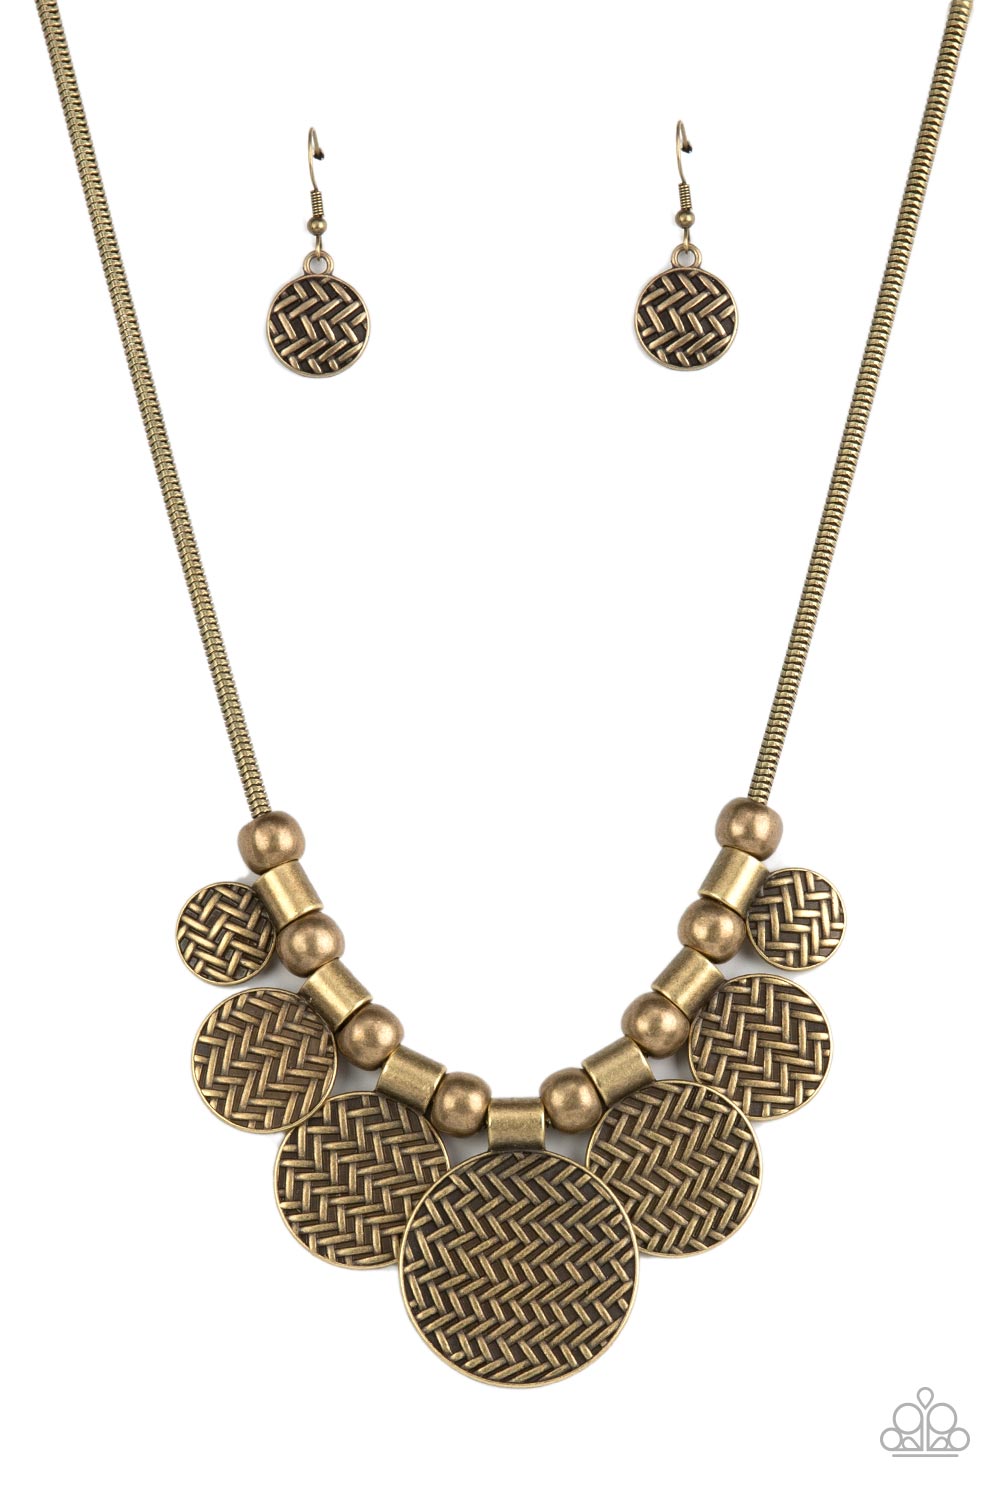 Indeginously Urban - Brass Disc Necklaces - Paparazzi Accessories Embossed in metallically stitched patterns, brass discs gradually increase in size as they alternate with chunky brass beads along a round brass snake chain, creating a noise-making fringe below the collar. Features an adjustable clasp closure. Sold as one individual necklace. Includes one pair of matching earrings.